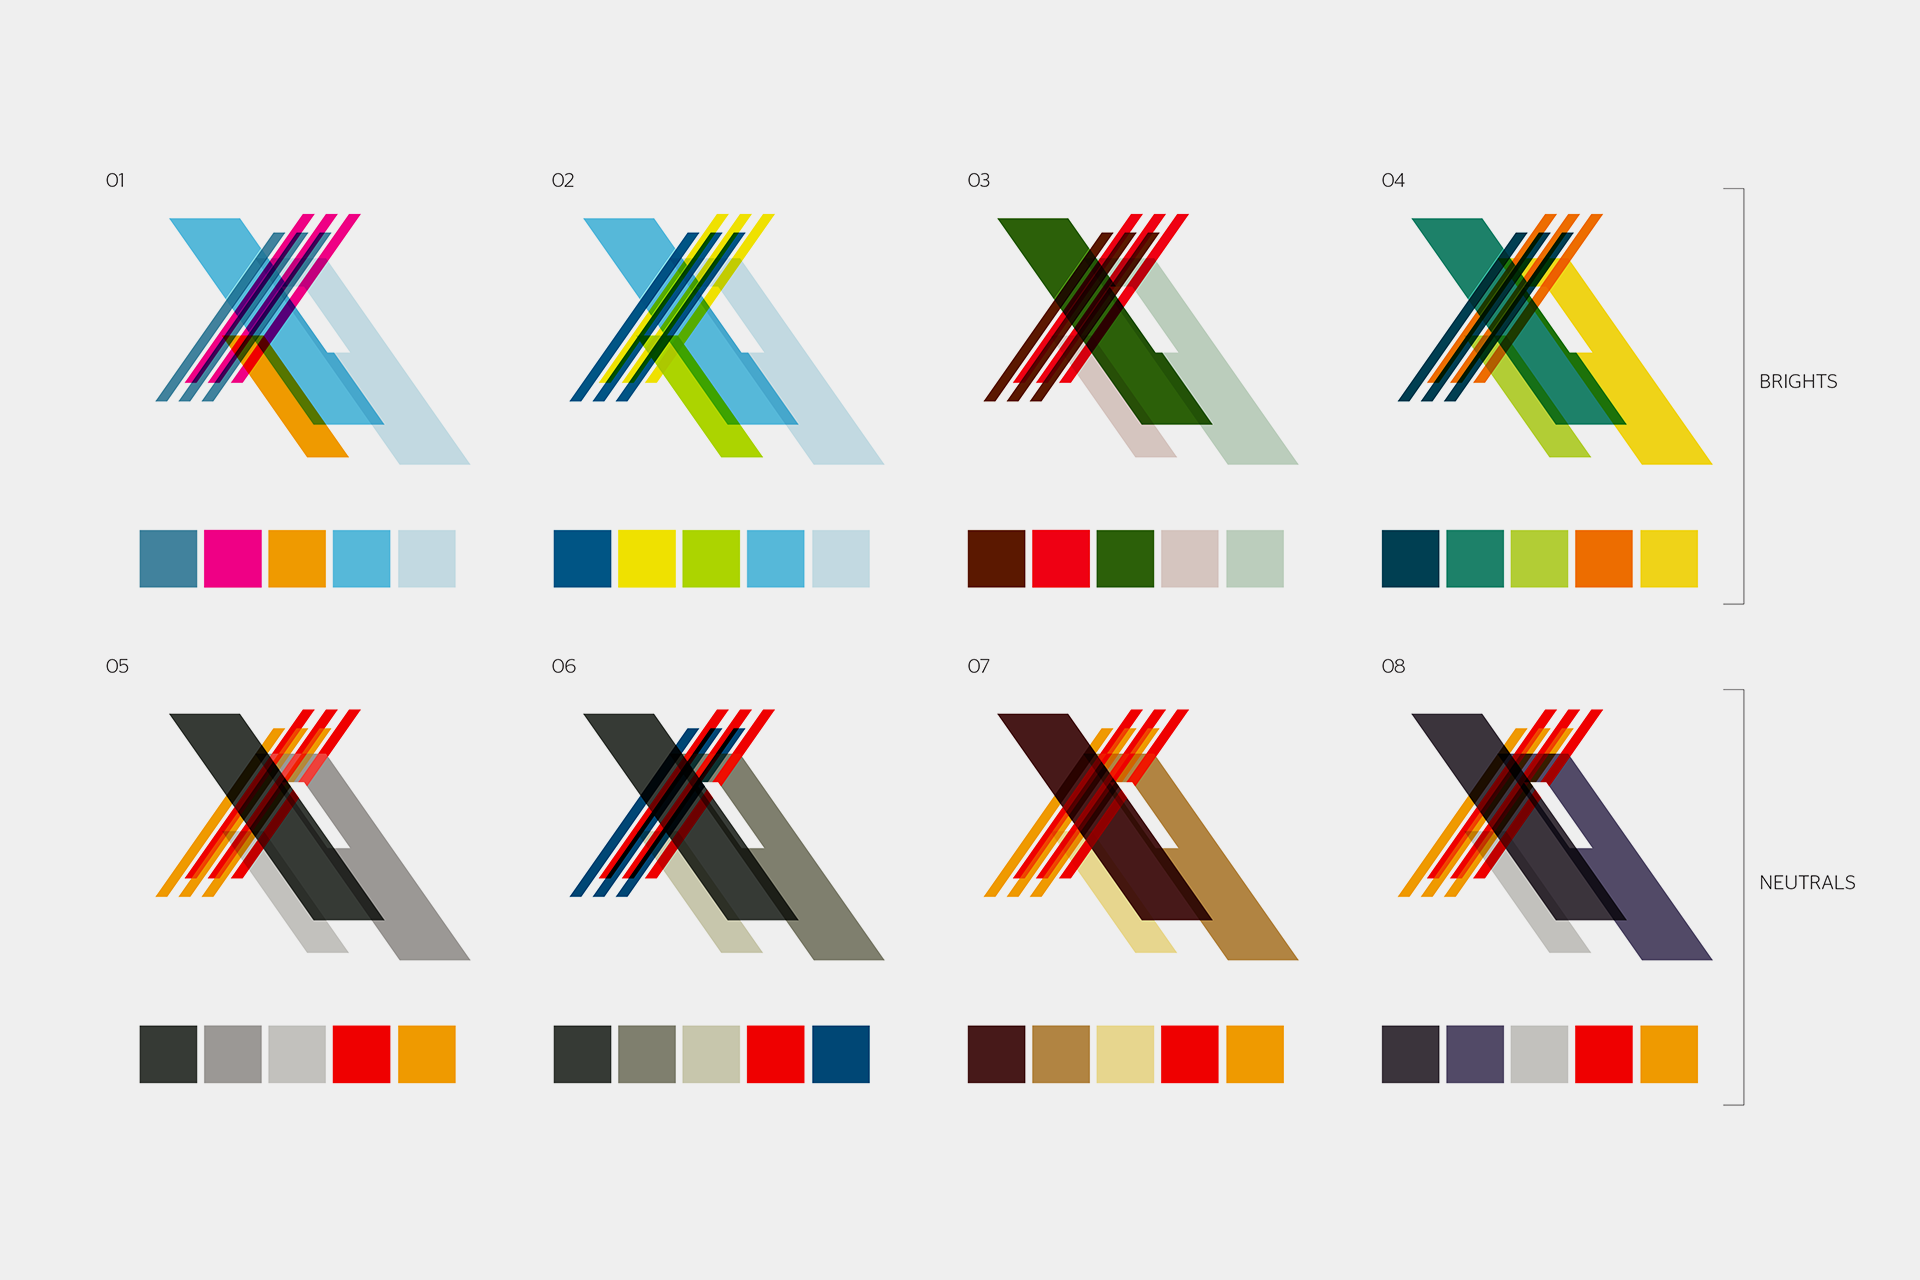 Once settling on a graphic device, the studio explored all the possible colour permutations.